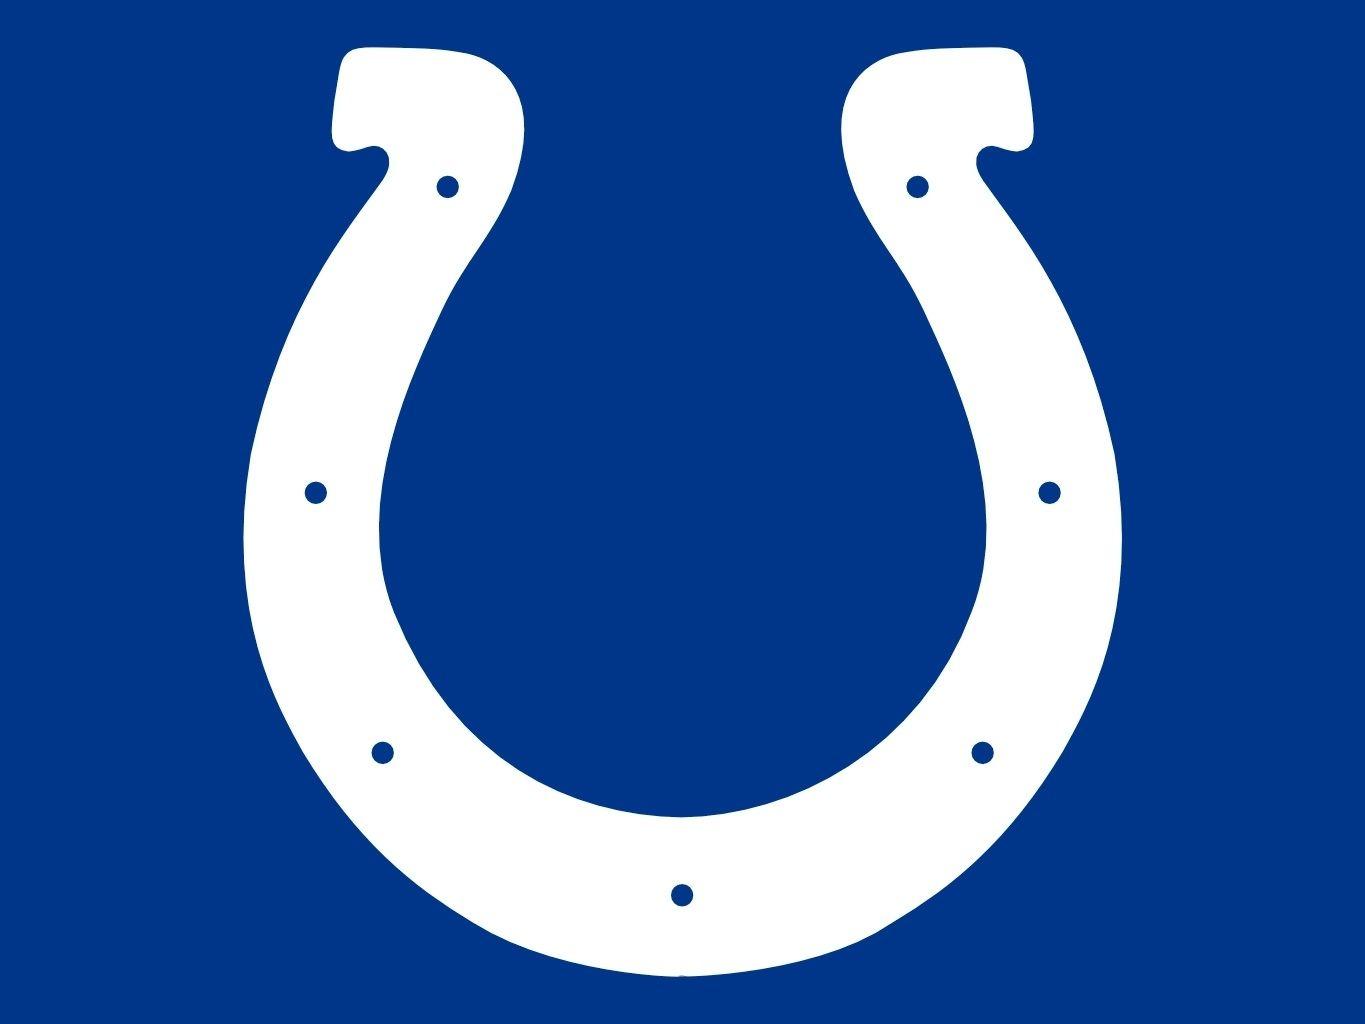 Colts Logo - Free Colts Logo, Download Free Clip Art, Free Clip Art on Clipart ...